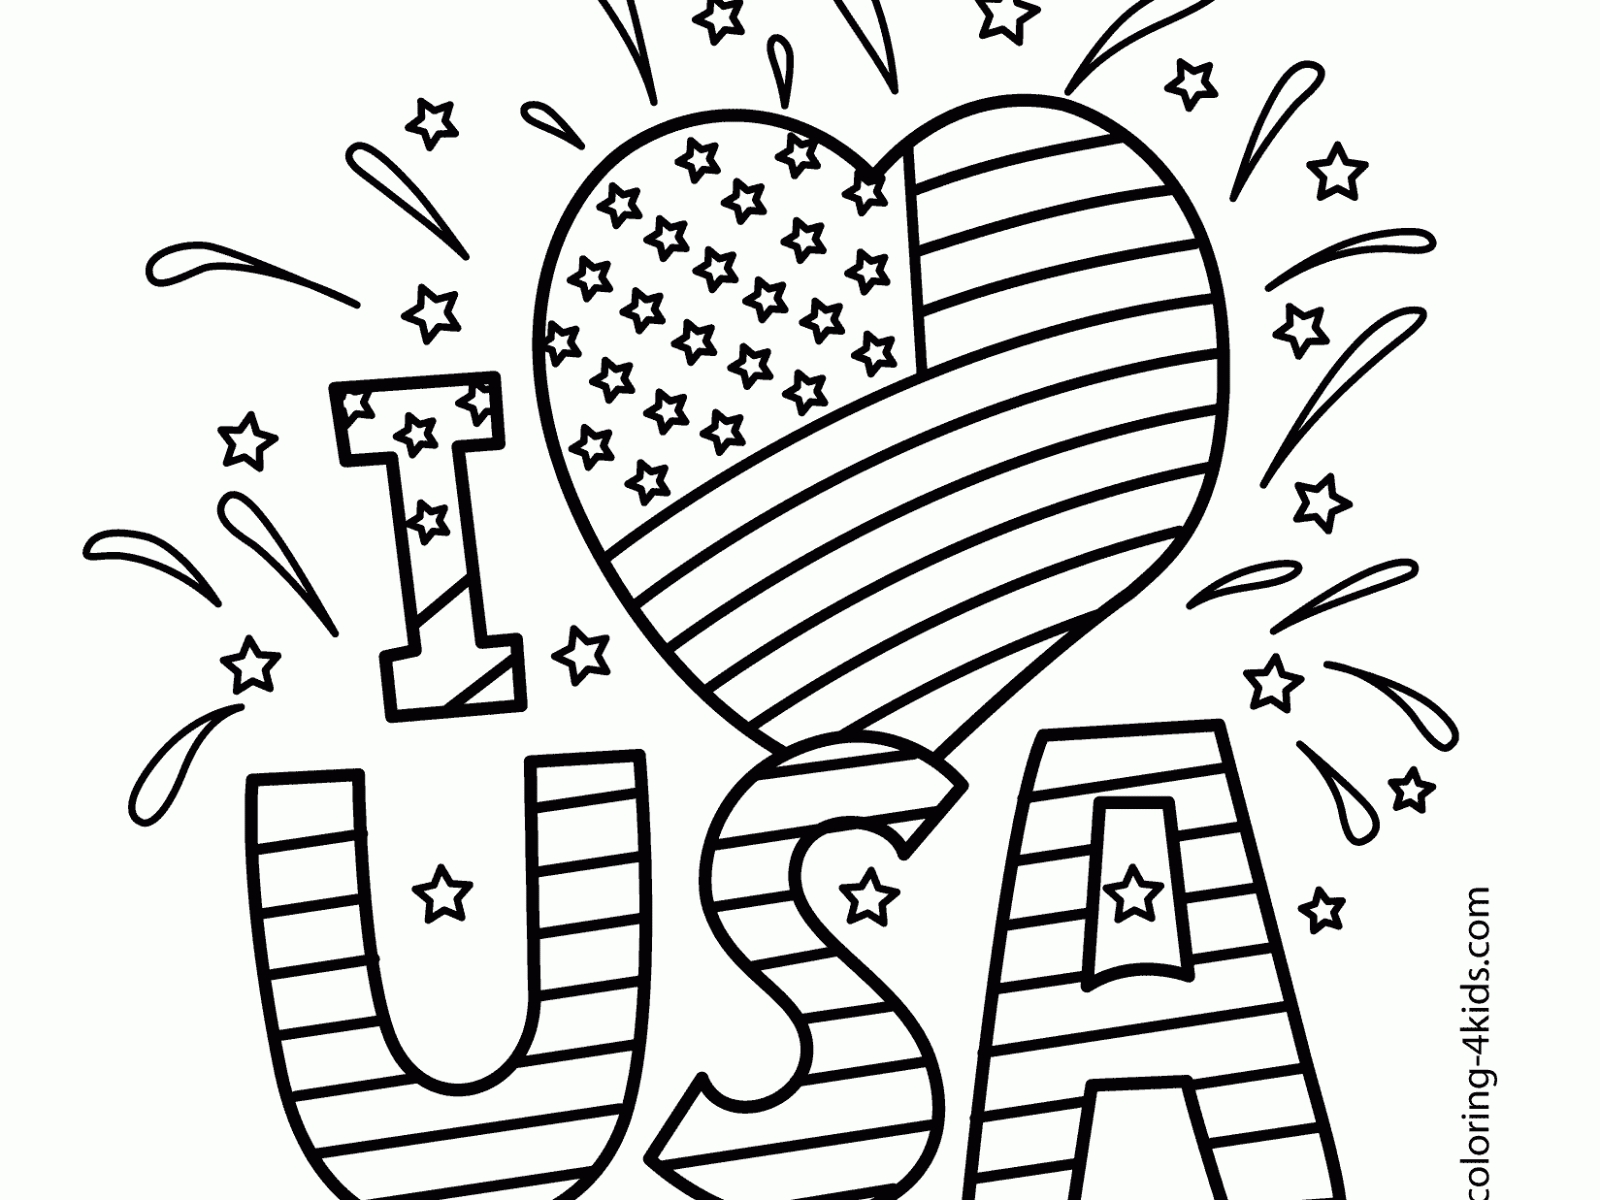 Memorial Day Coloring Pages at Free printable